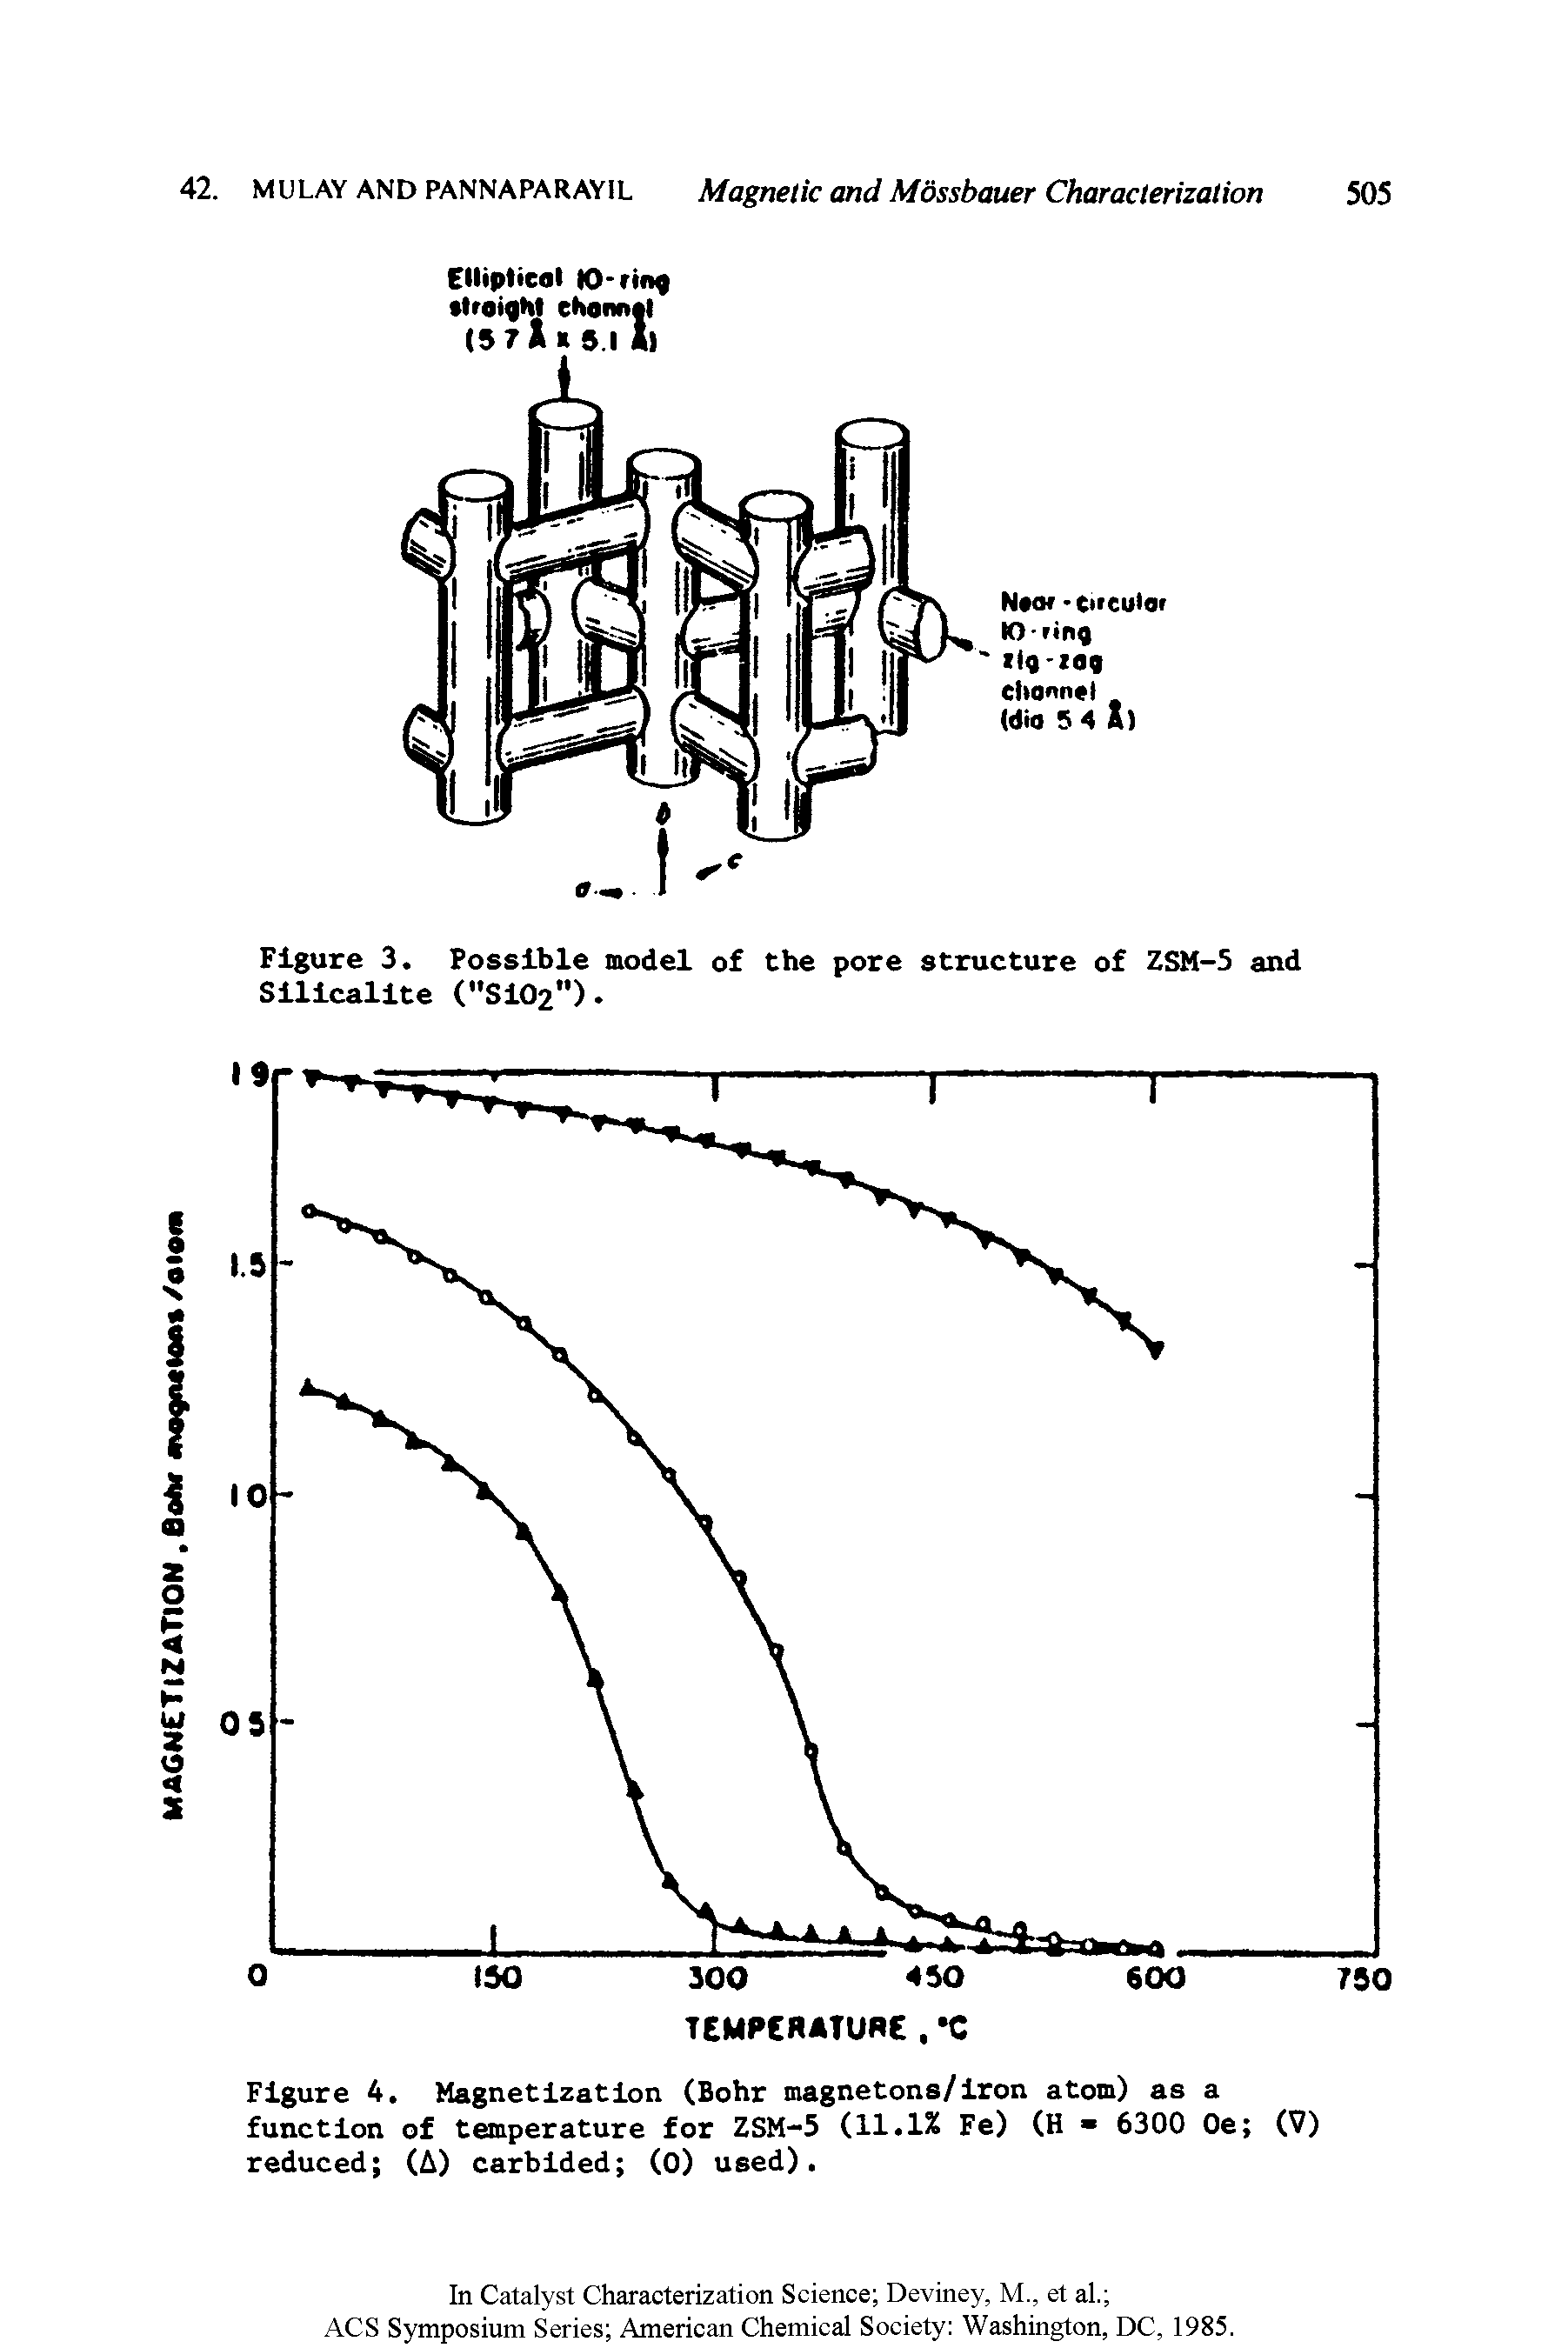 Figure 4. Magnetization (Bohr magnetons/iron atom) as a function of temperature for ZSM-5 (11.1% Fe) (H 6300 Oe (V) reduced (A) carbided (0) used).